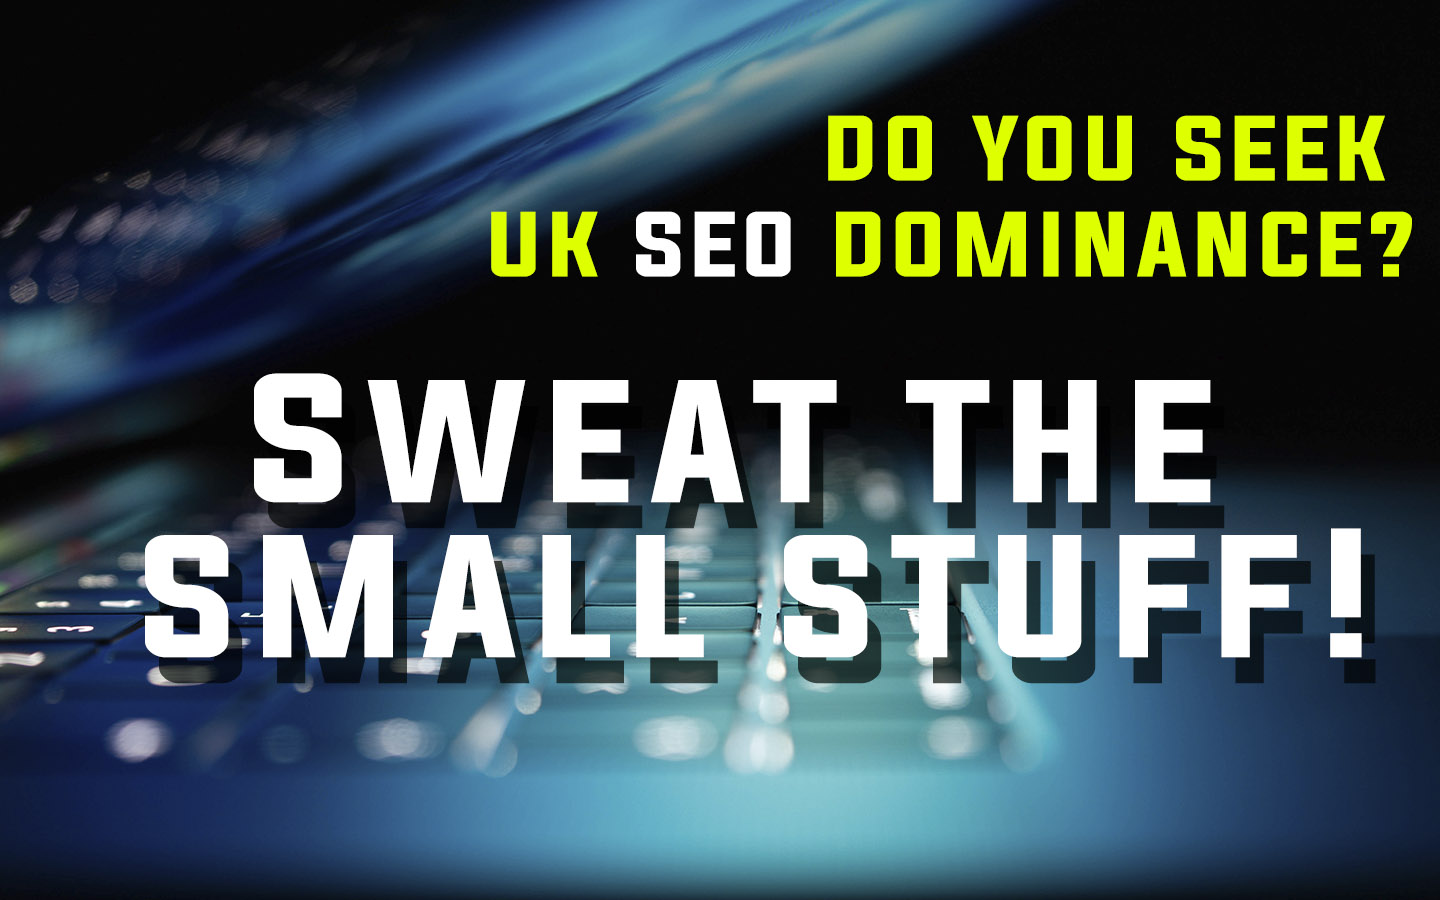 Text Reading 'Do You Seek UK SEO Dominsnce?' Sweat The Small Stuff!' The background is a soft-focus close up of a half-closed laptop.